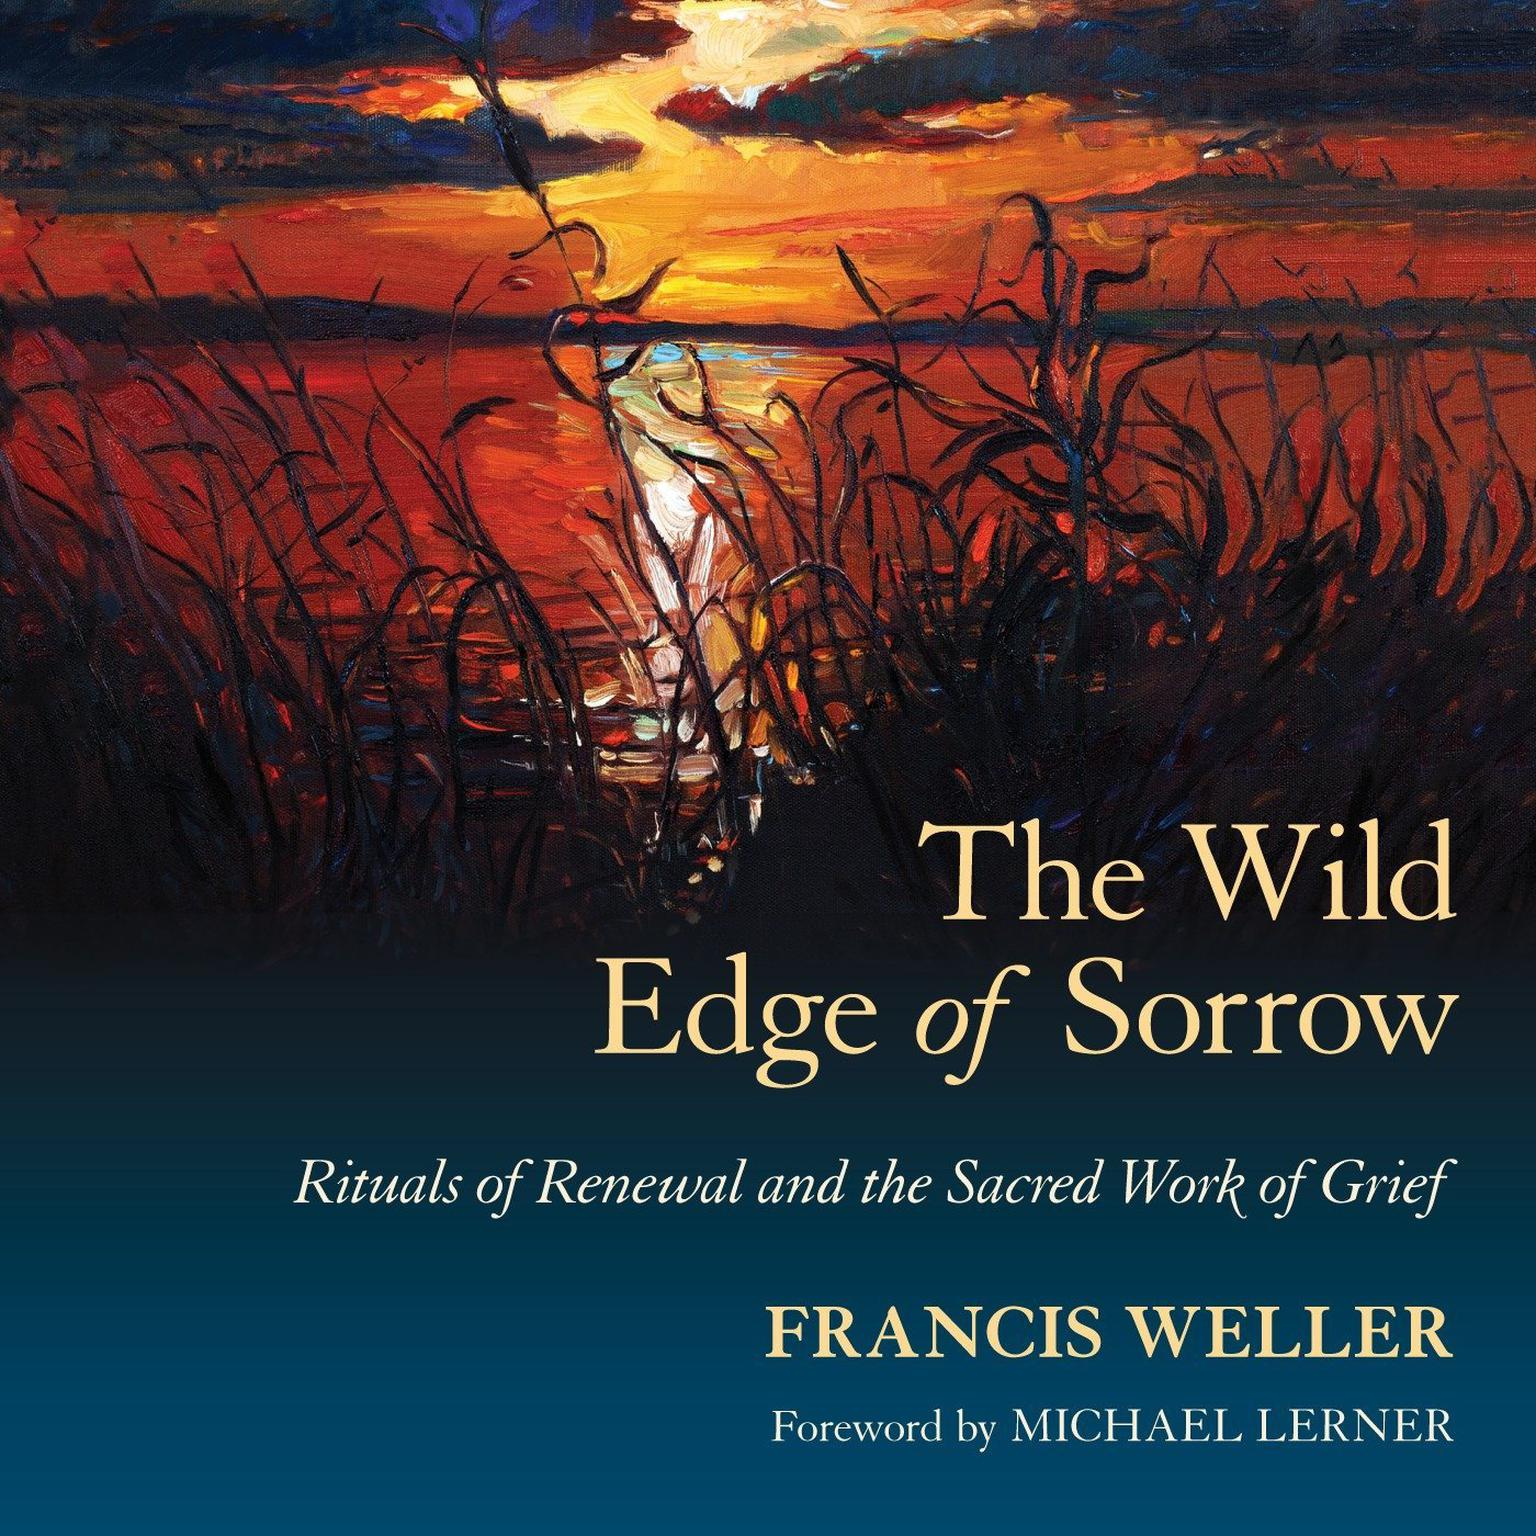 The Wild Edge of Sorrow: Rituals of Renewal and the Sacred Work of Grief Audiobook, by Francis Weller